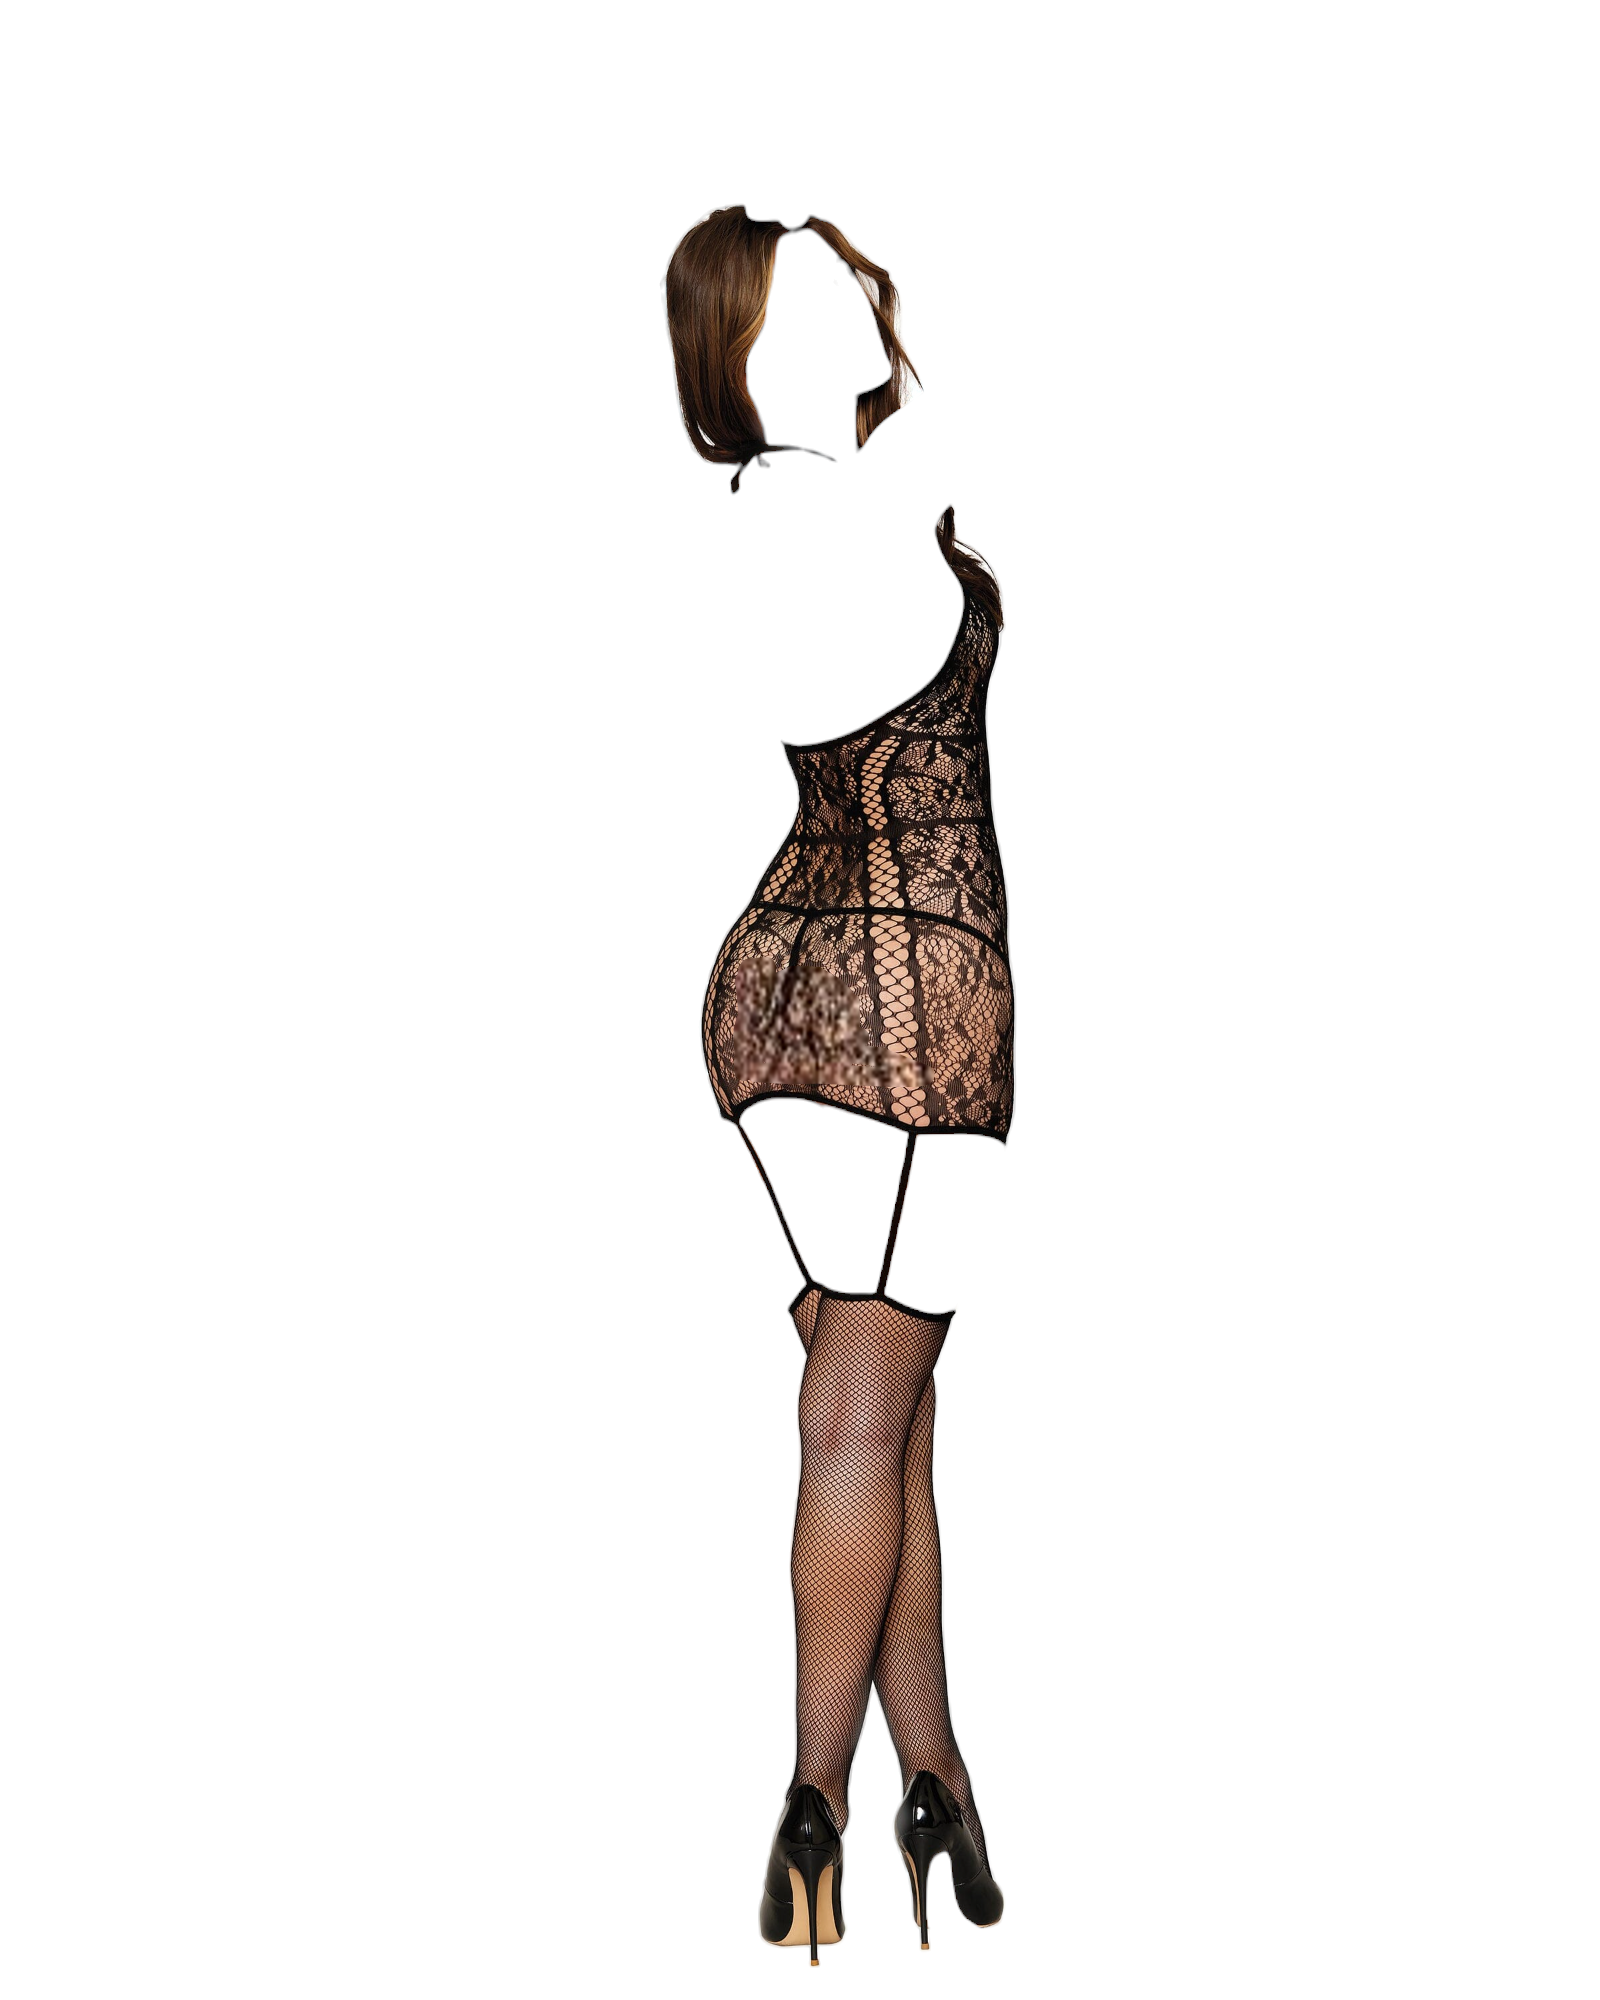 Dreamgirl Lace Garter Dress With Attached Garters and Fishnet Thigh-High Stockings Black One Size